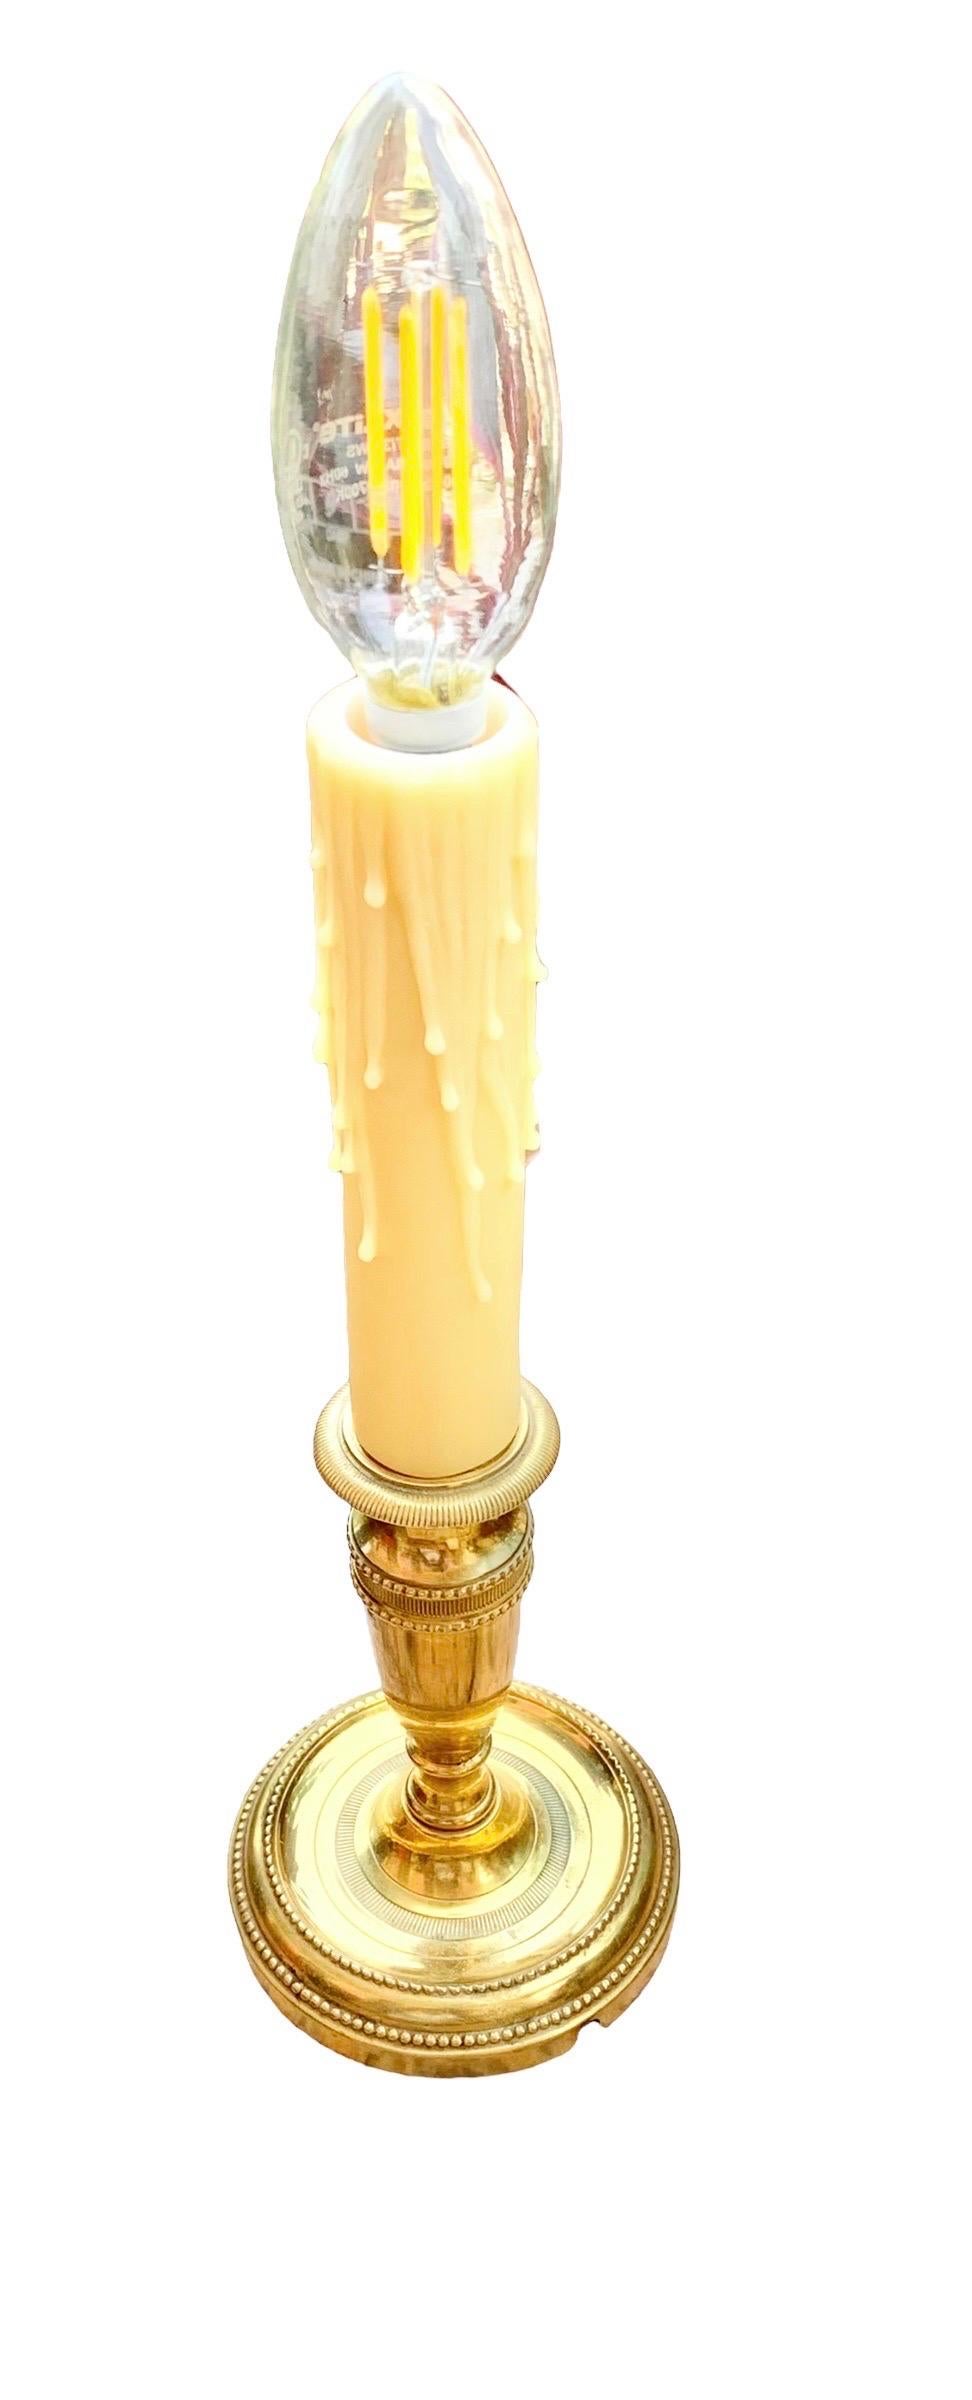 A lovely vintage French solid brass beaded candlestick lamp with a cream silk shade, an in line switch and new American socket.

Use it for a vanity lamp  in your dressing area, in a bookcase as an accent light or anywhere in a well appointed home. 